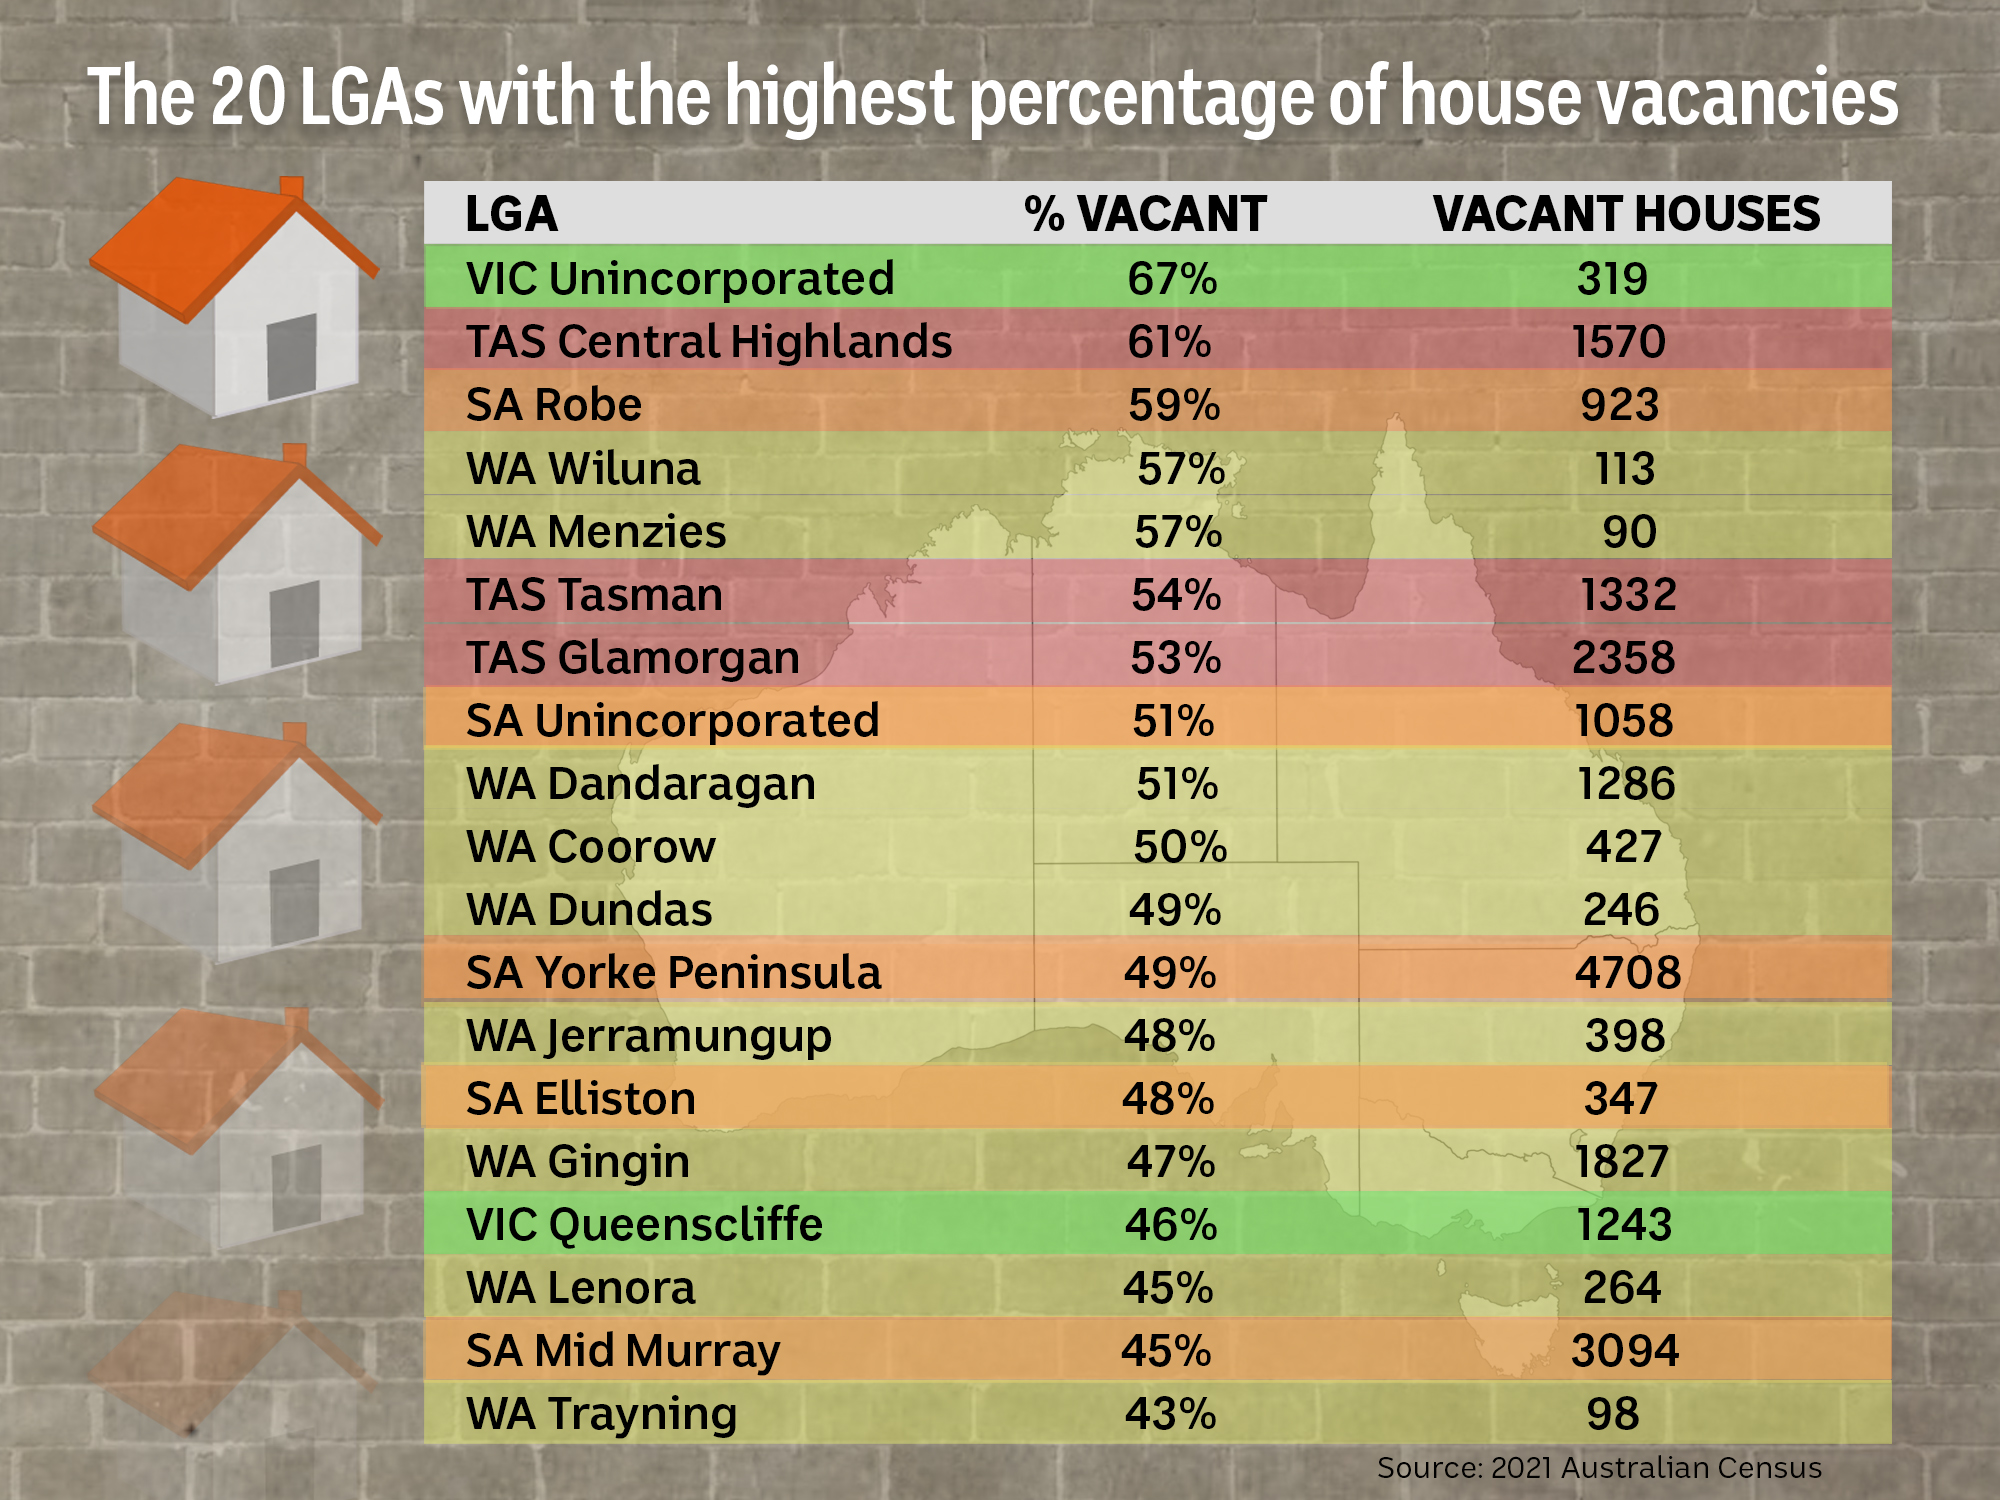 A table showing the 20 local government areas with the highest percentage of vacant houses